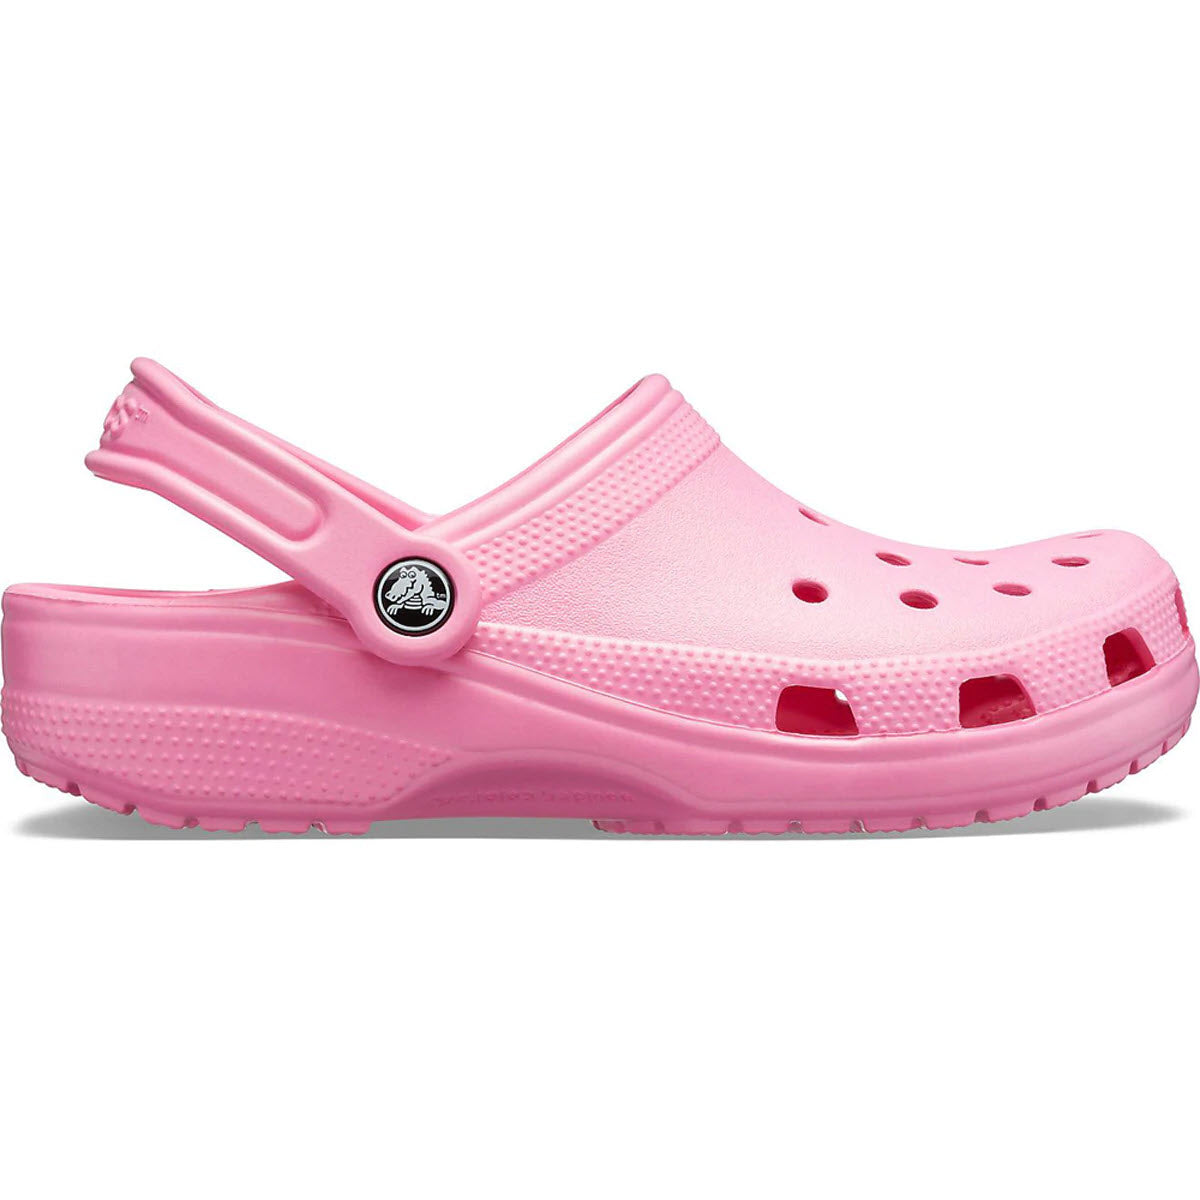 A single Crocs Classic Taffy Pink - Womens displayed against a white background.